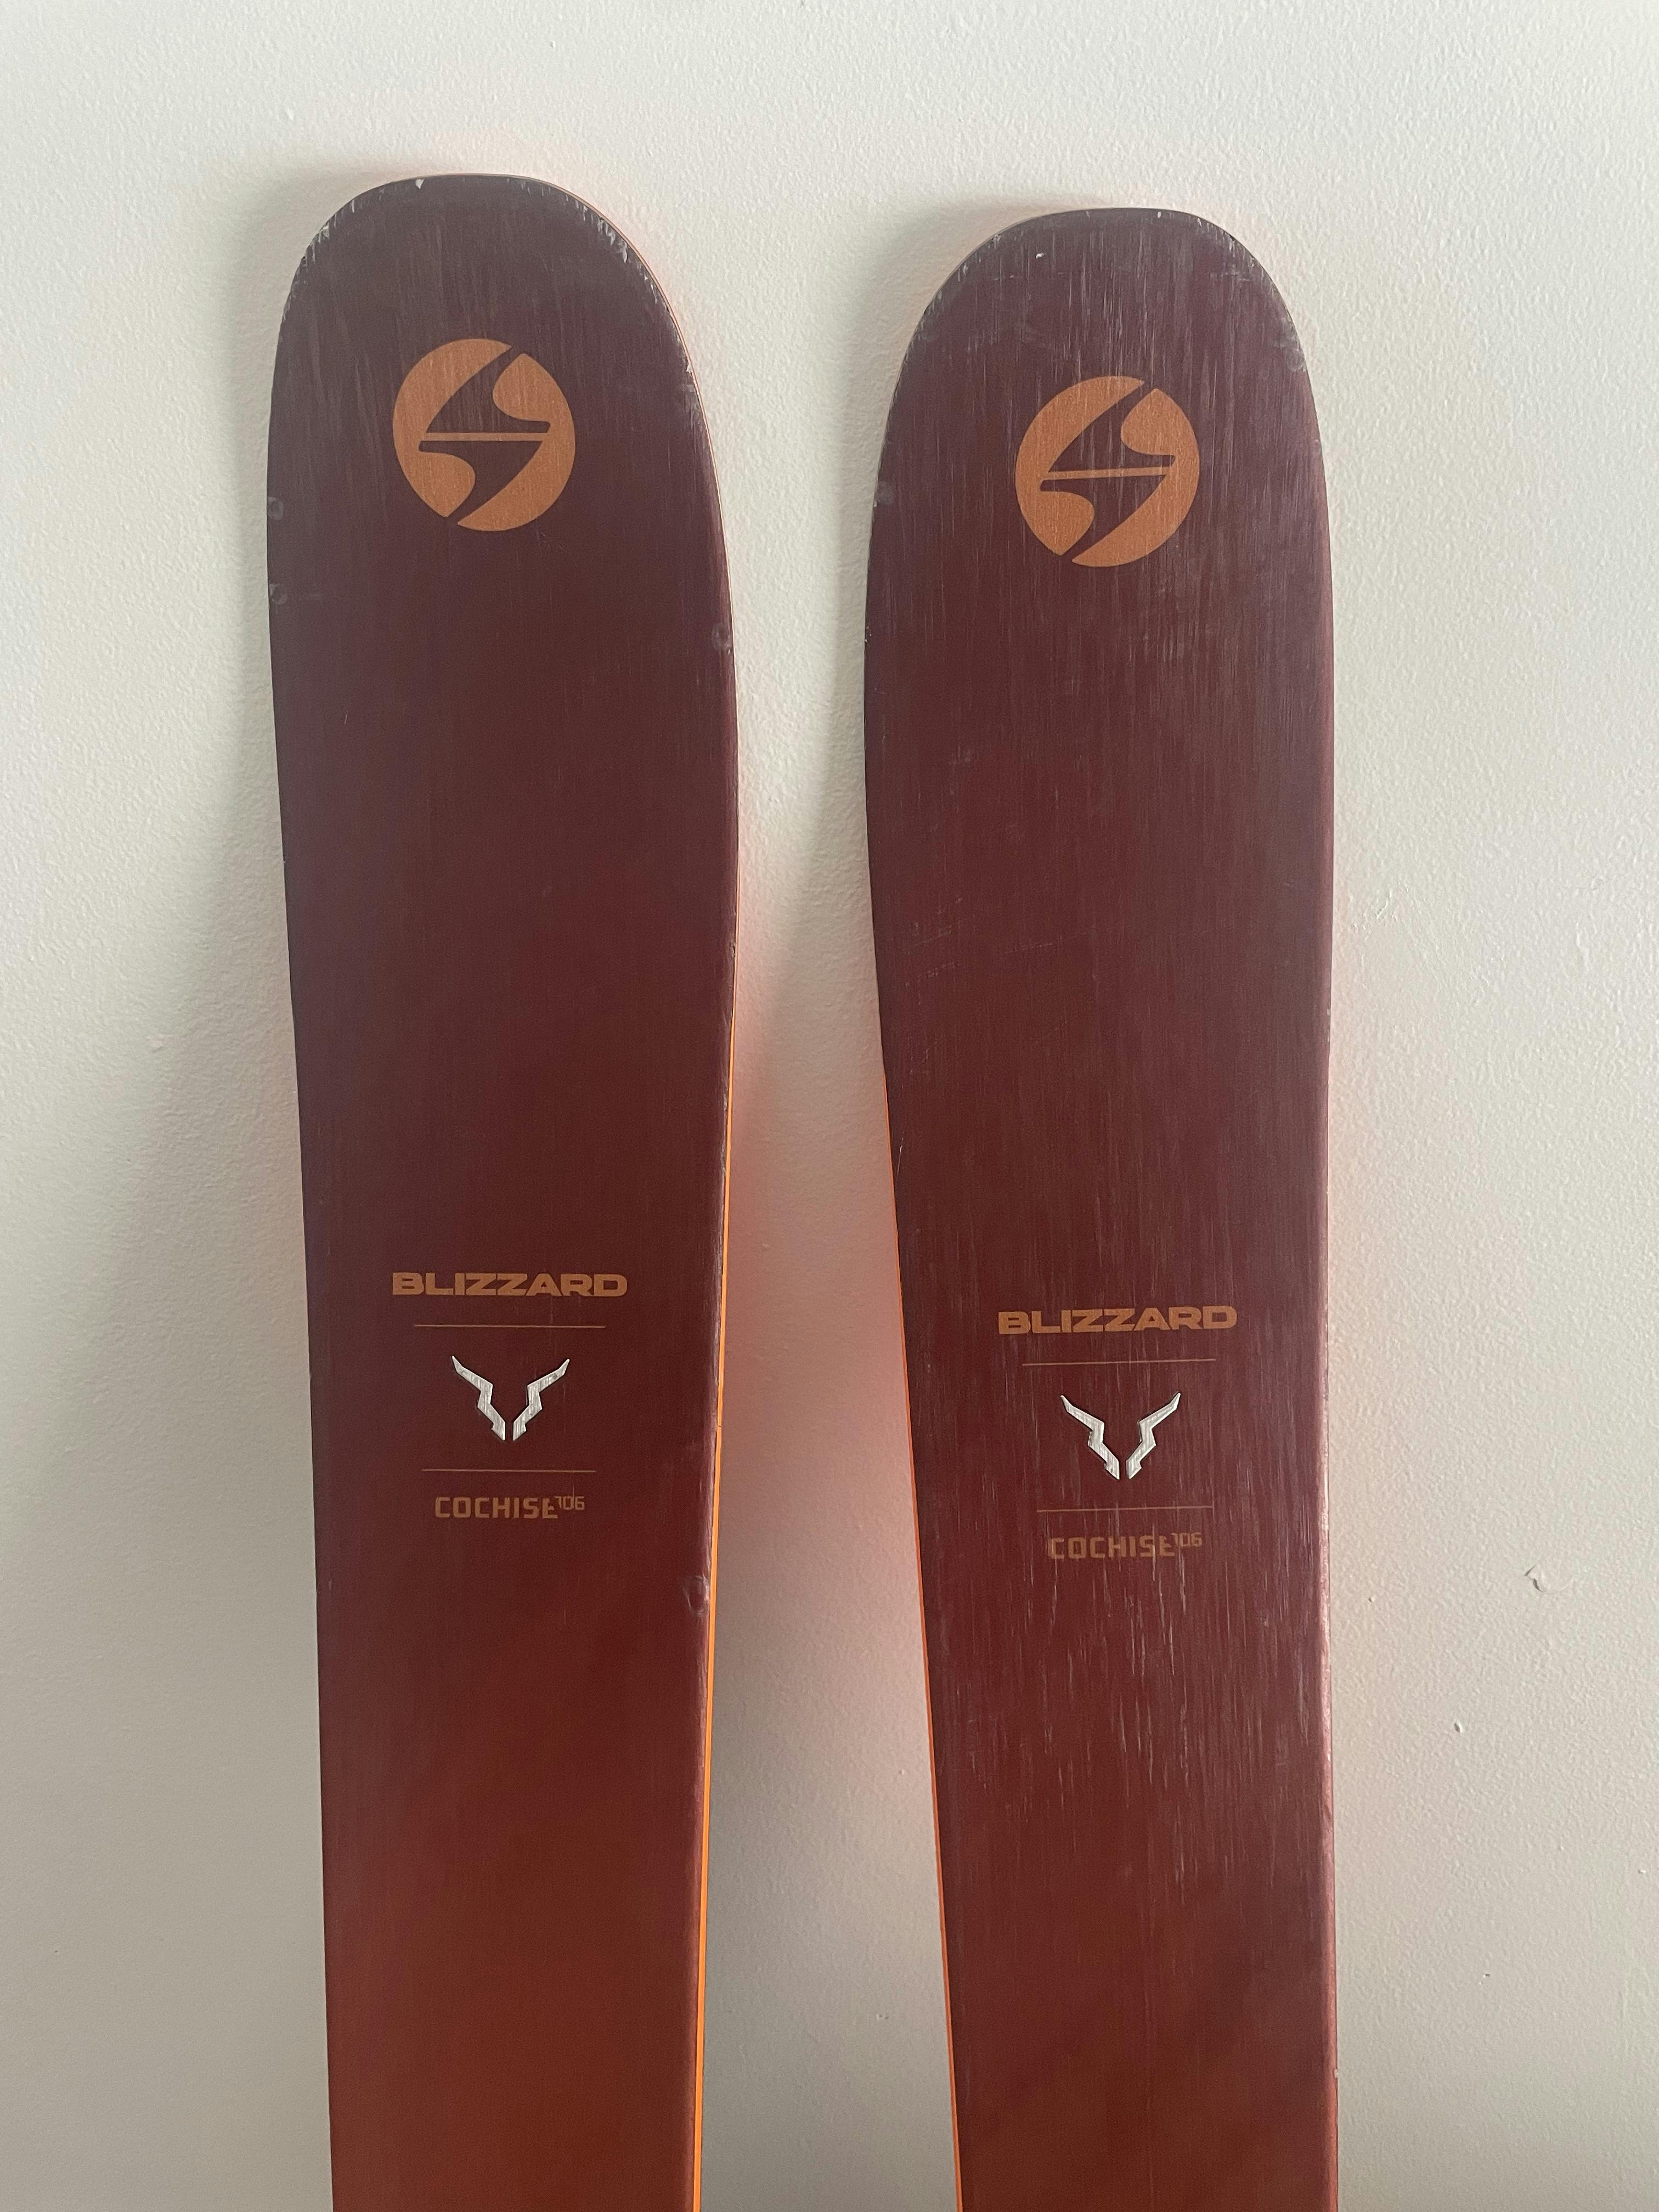 Top of the  Blizzard Cochise 106 Skis · 2021 after 10 days of wear.